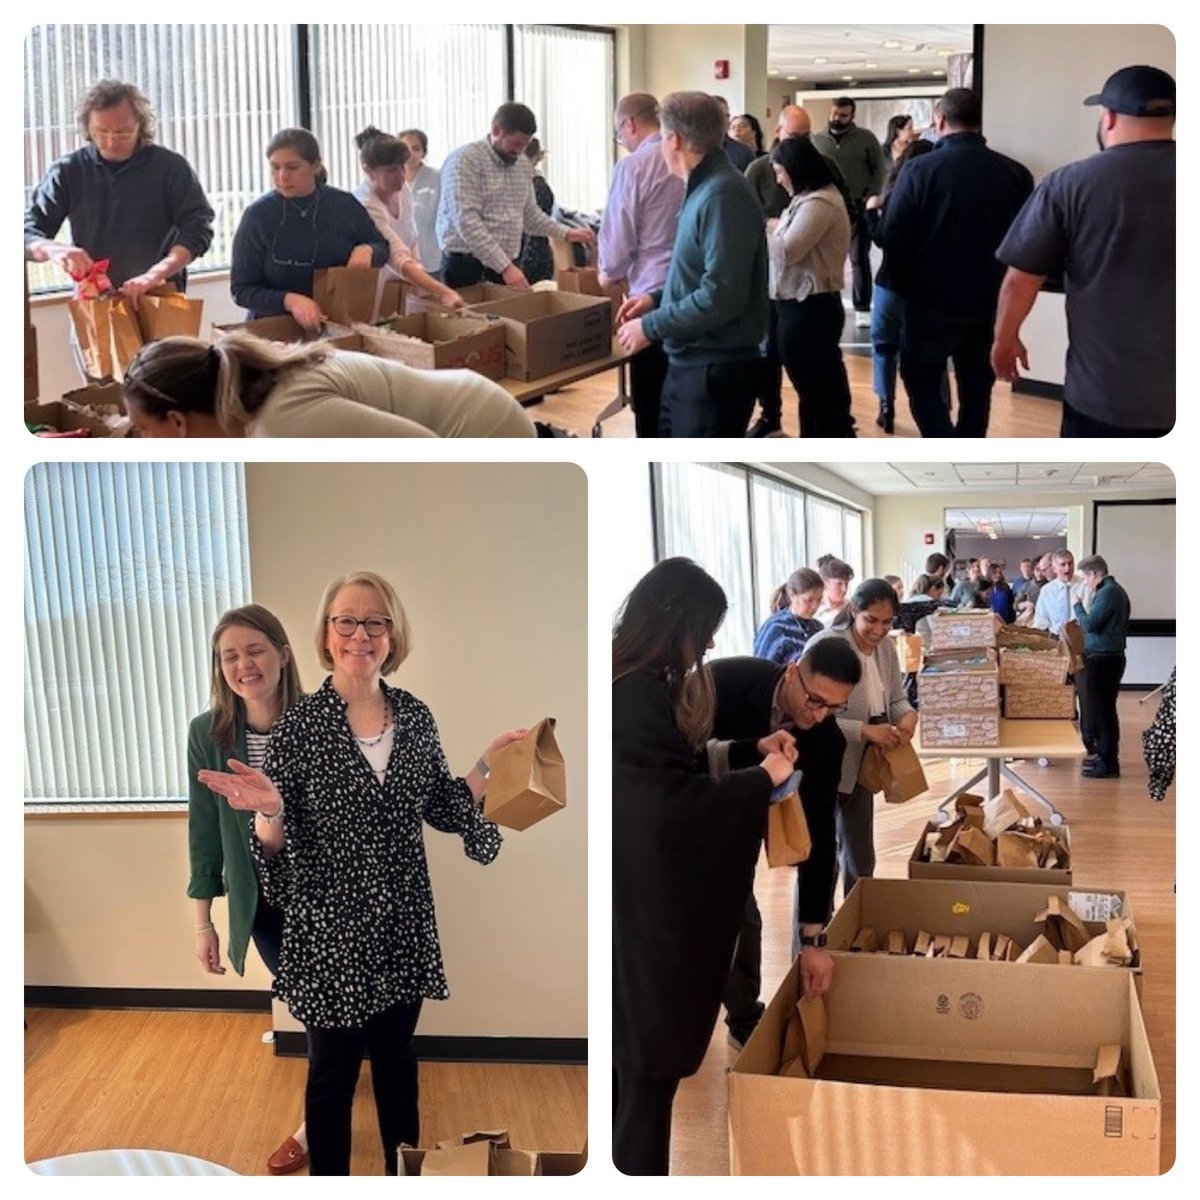 Kiniksa was thrilled to put together 650 Snack Packs for Youth Enrichment Services this past Tuesday! A huge thank you to @LS_Cares for always keeping us connected with great organizations.